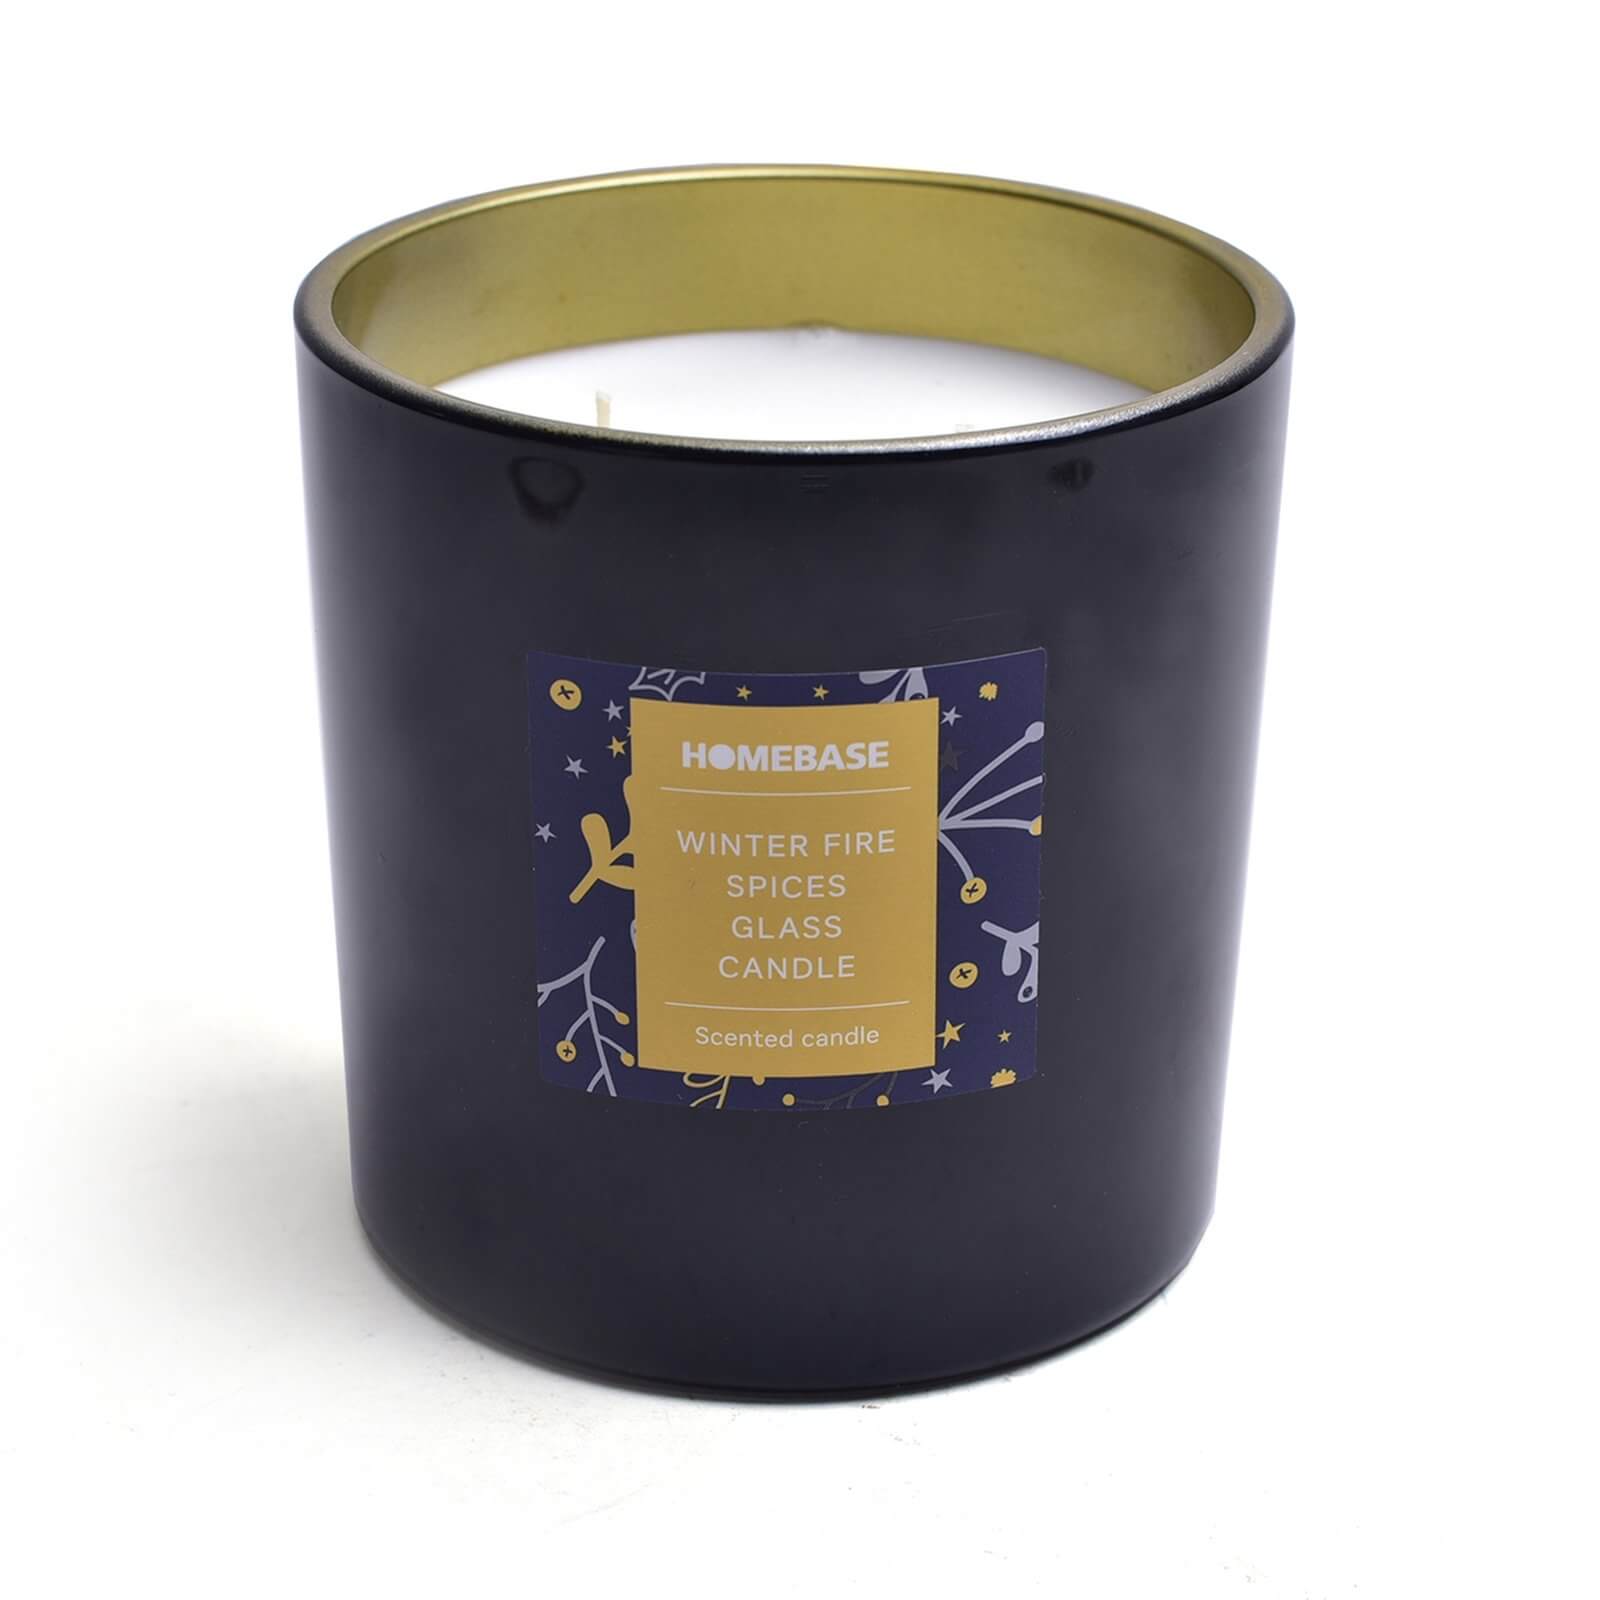 Winter Fire Spices Candle Black - Large